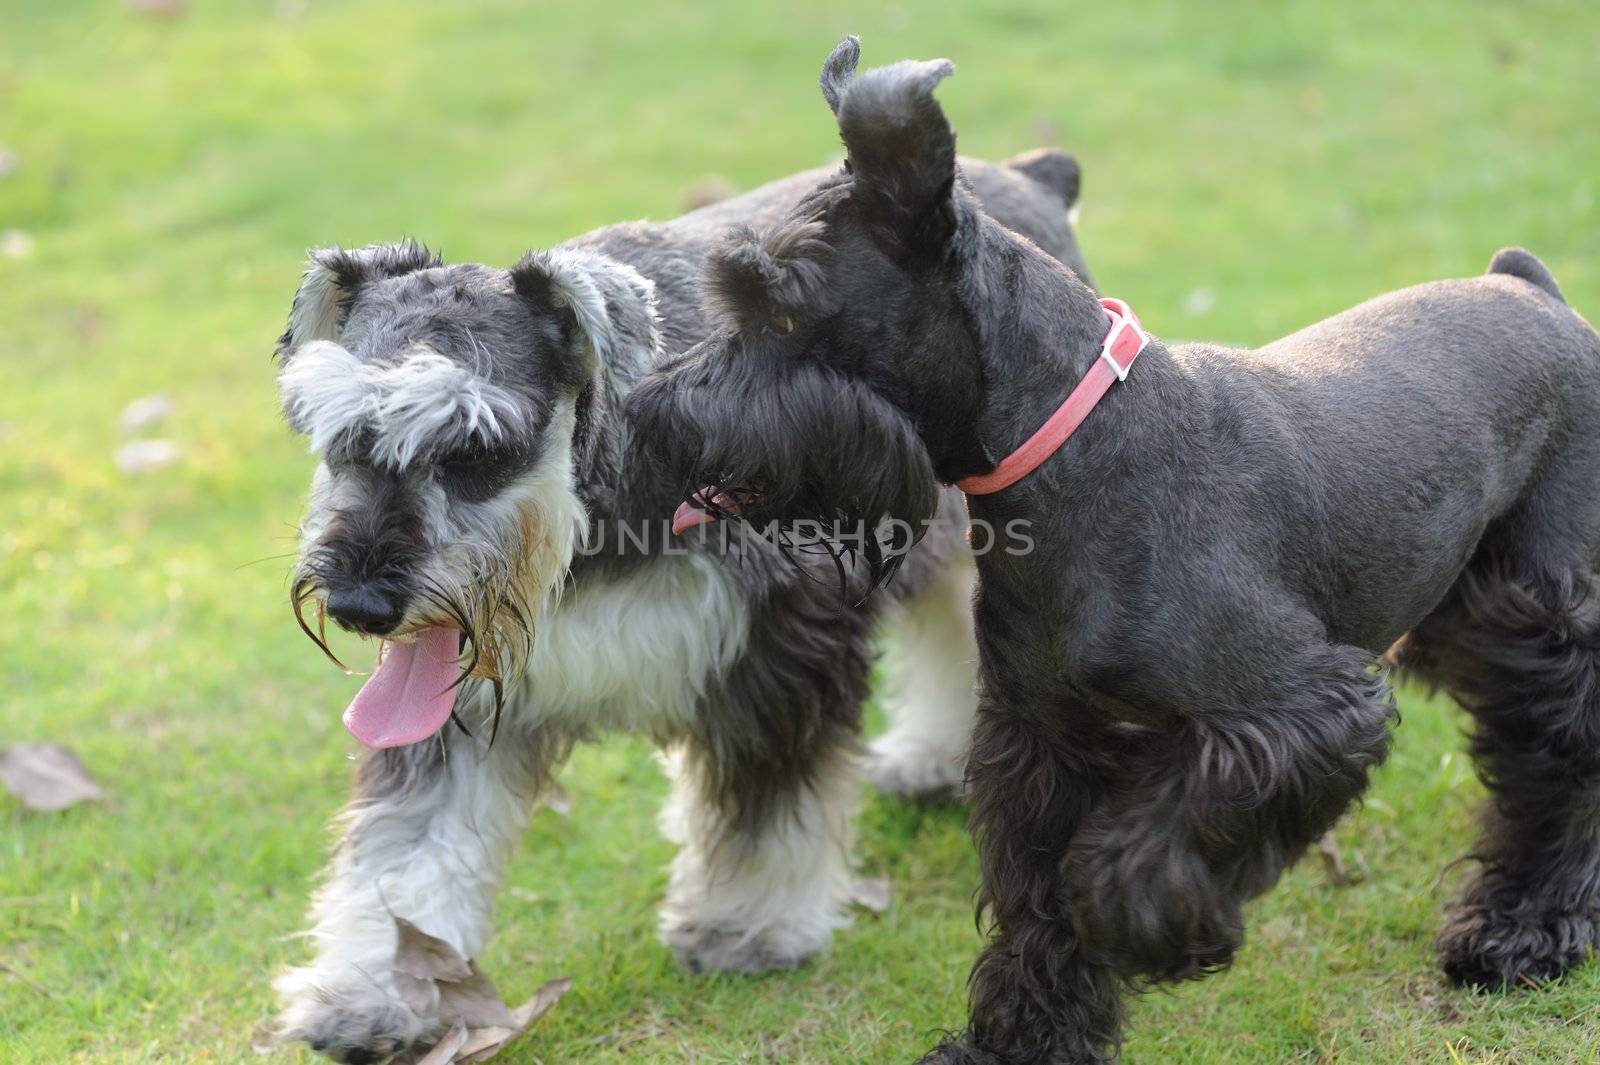 Two Miniature Schnauzer dogs on the lawn